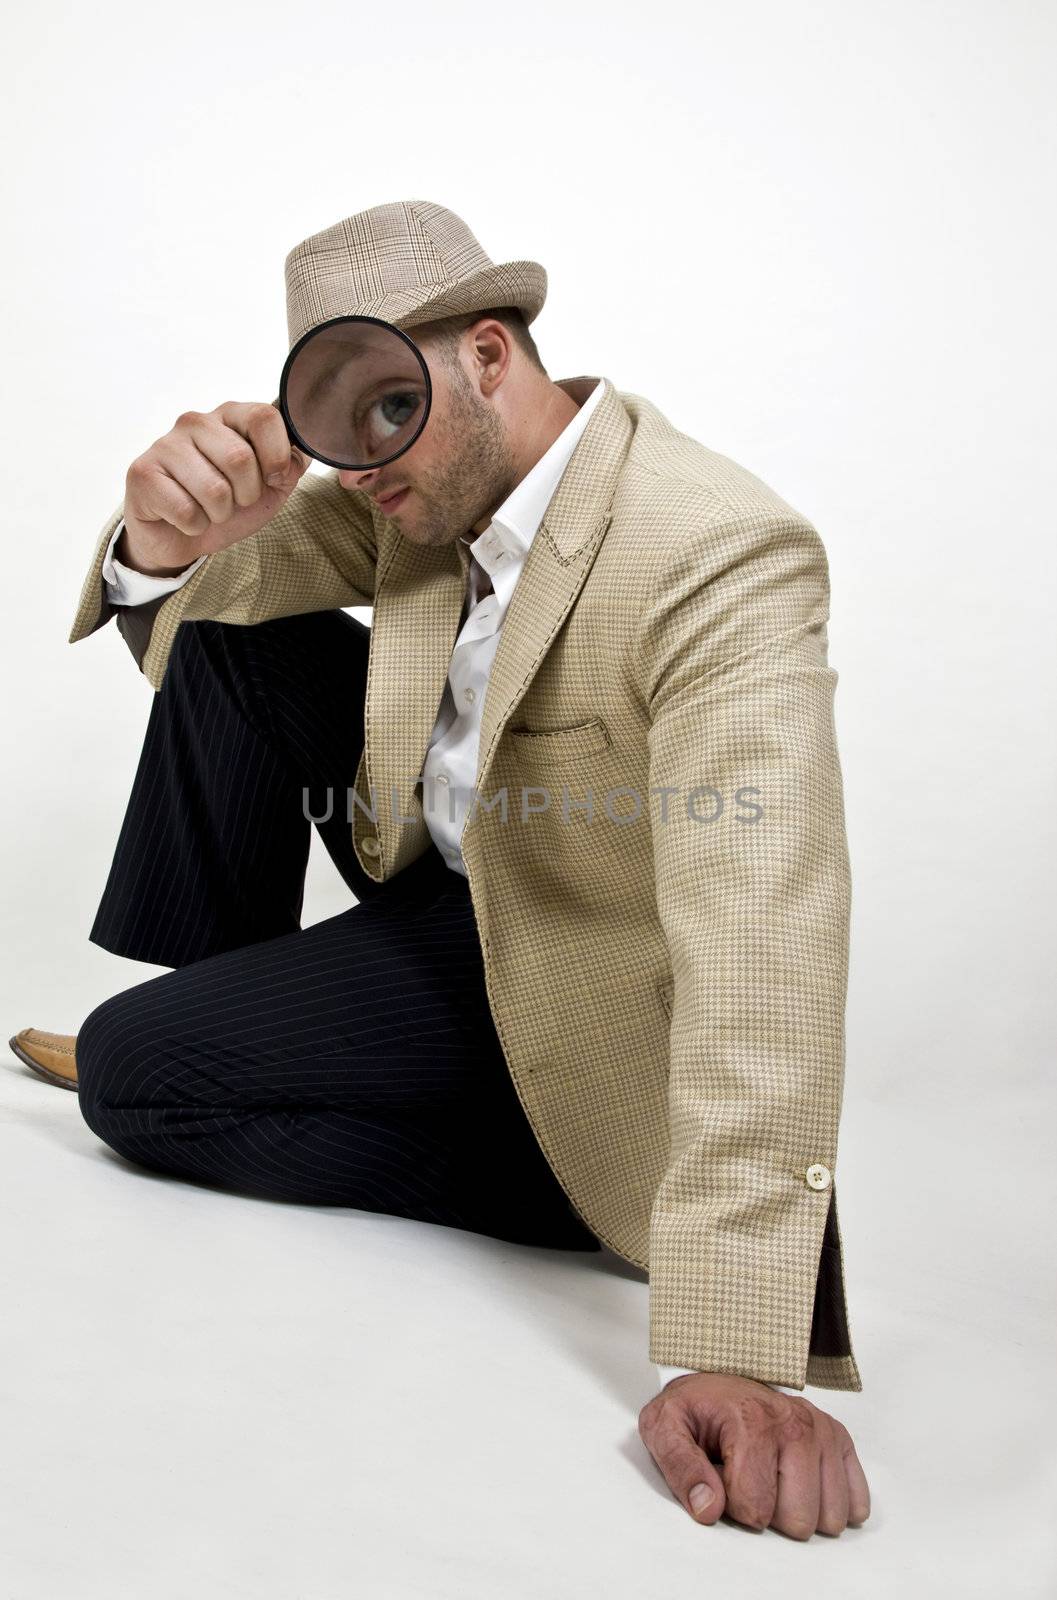 man holding magnifier close to his eye on isolated background
